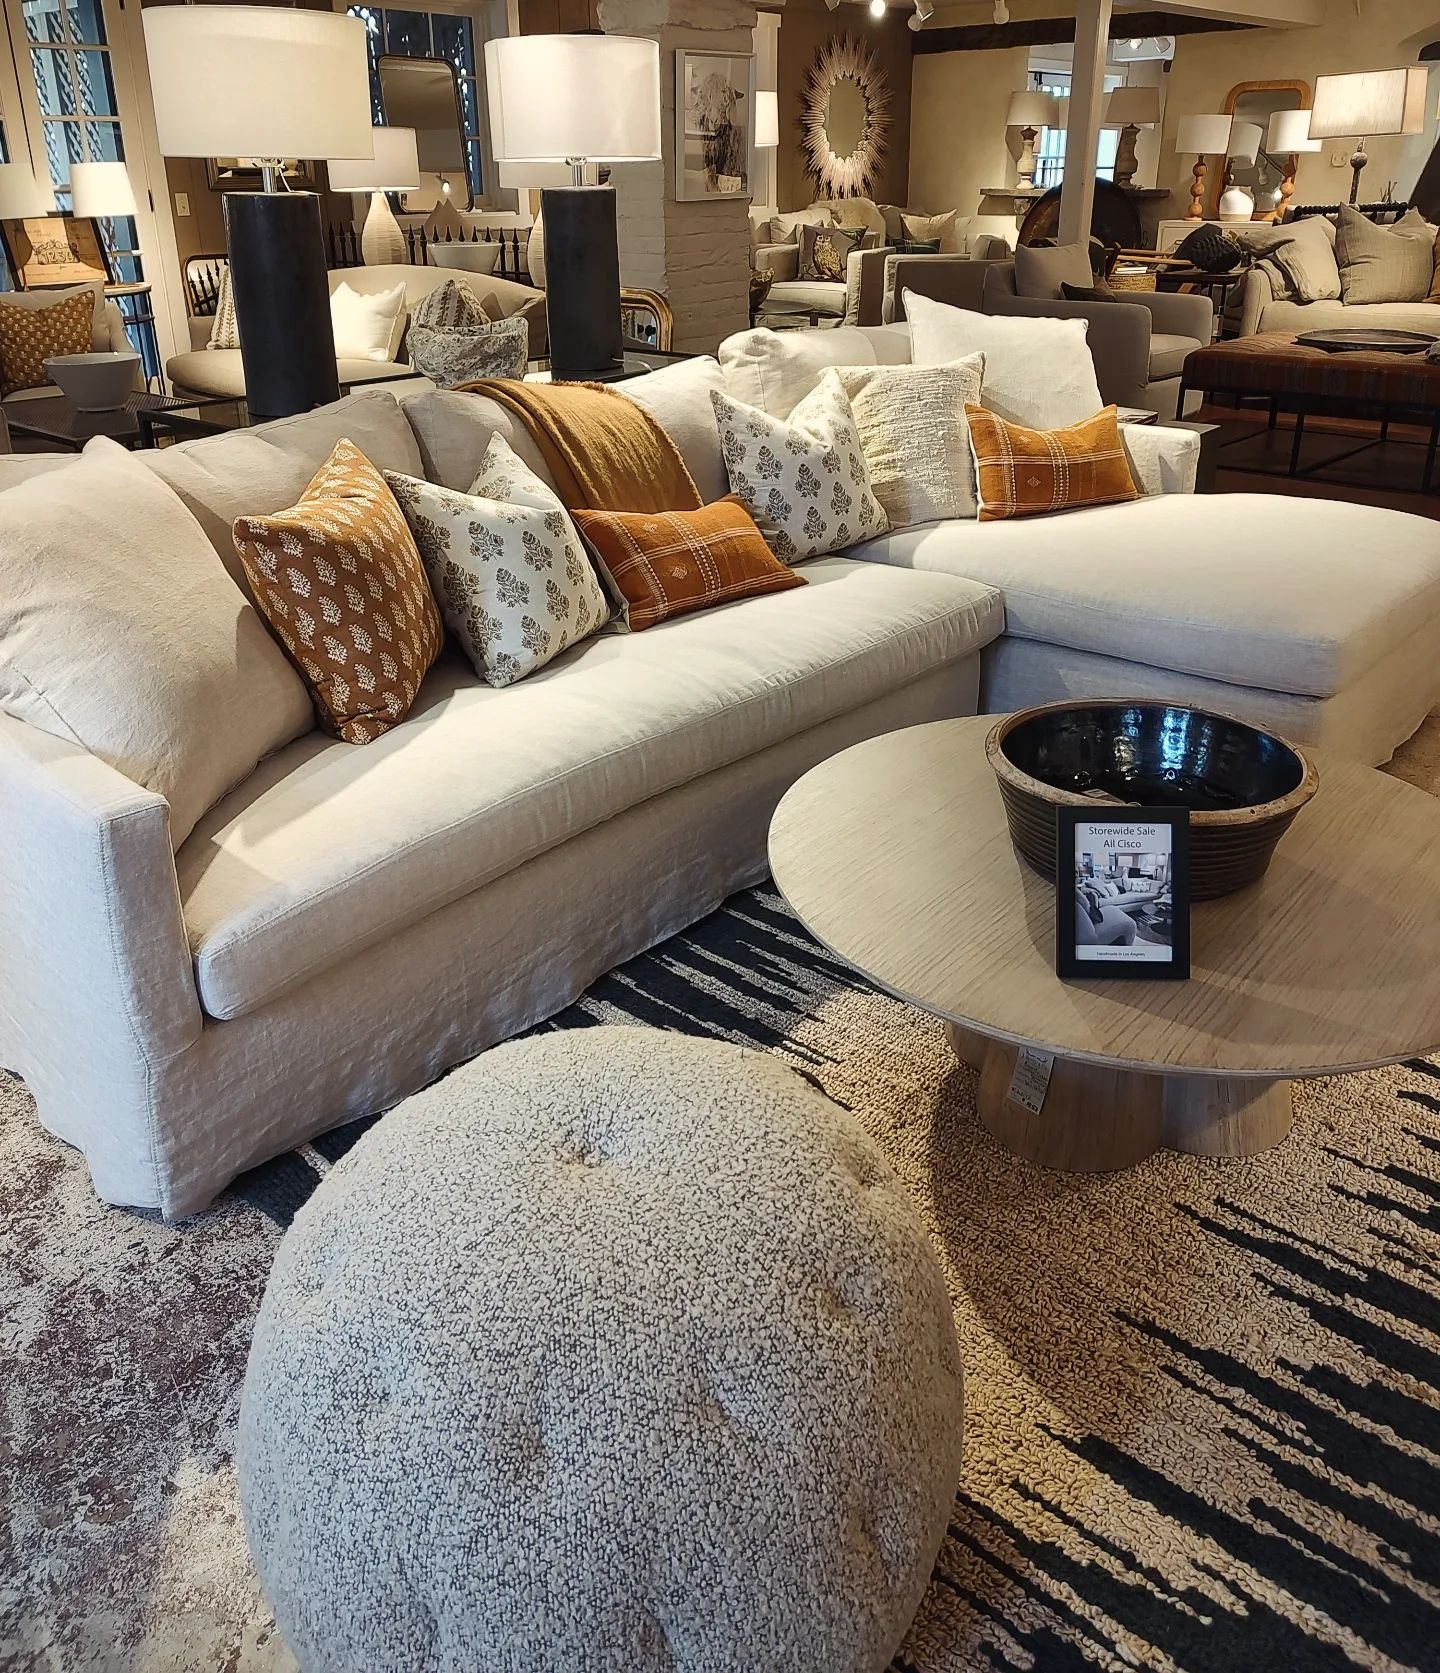 Last weekend of our Cisco Brothers Upholstery Sale ...big savings on sectionals, sofas, loveseats and chairs.  All handmade in California.  @myciscohome @libeco_home #belgianlinen #sustainable #delivery ##newprestonct #washingtonbusinessassociation